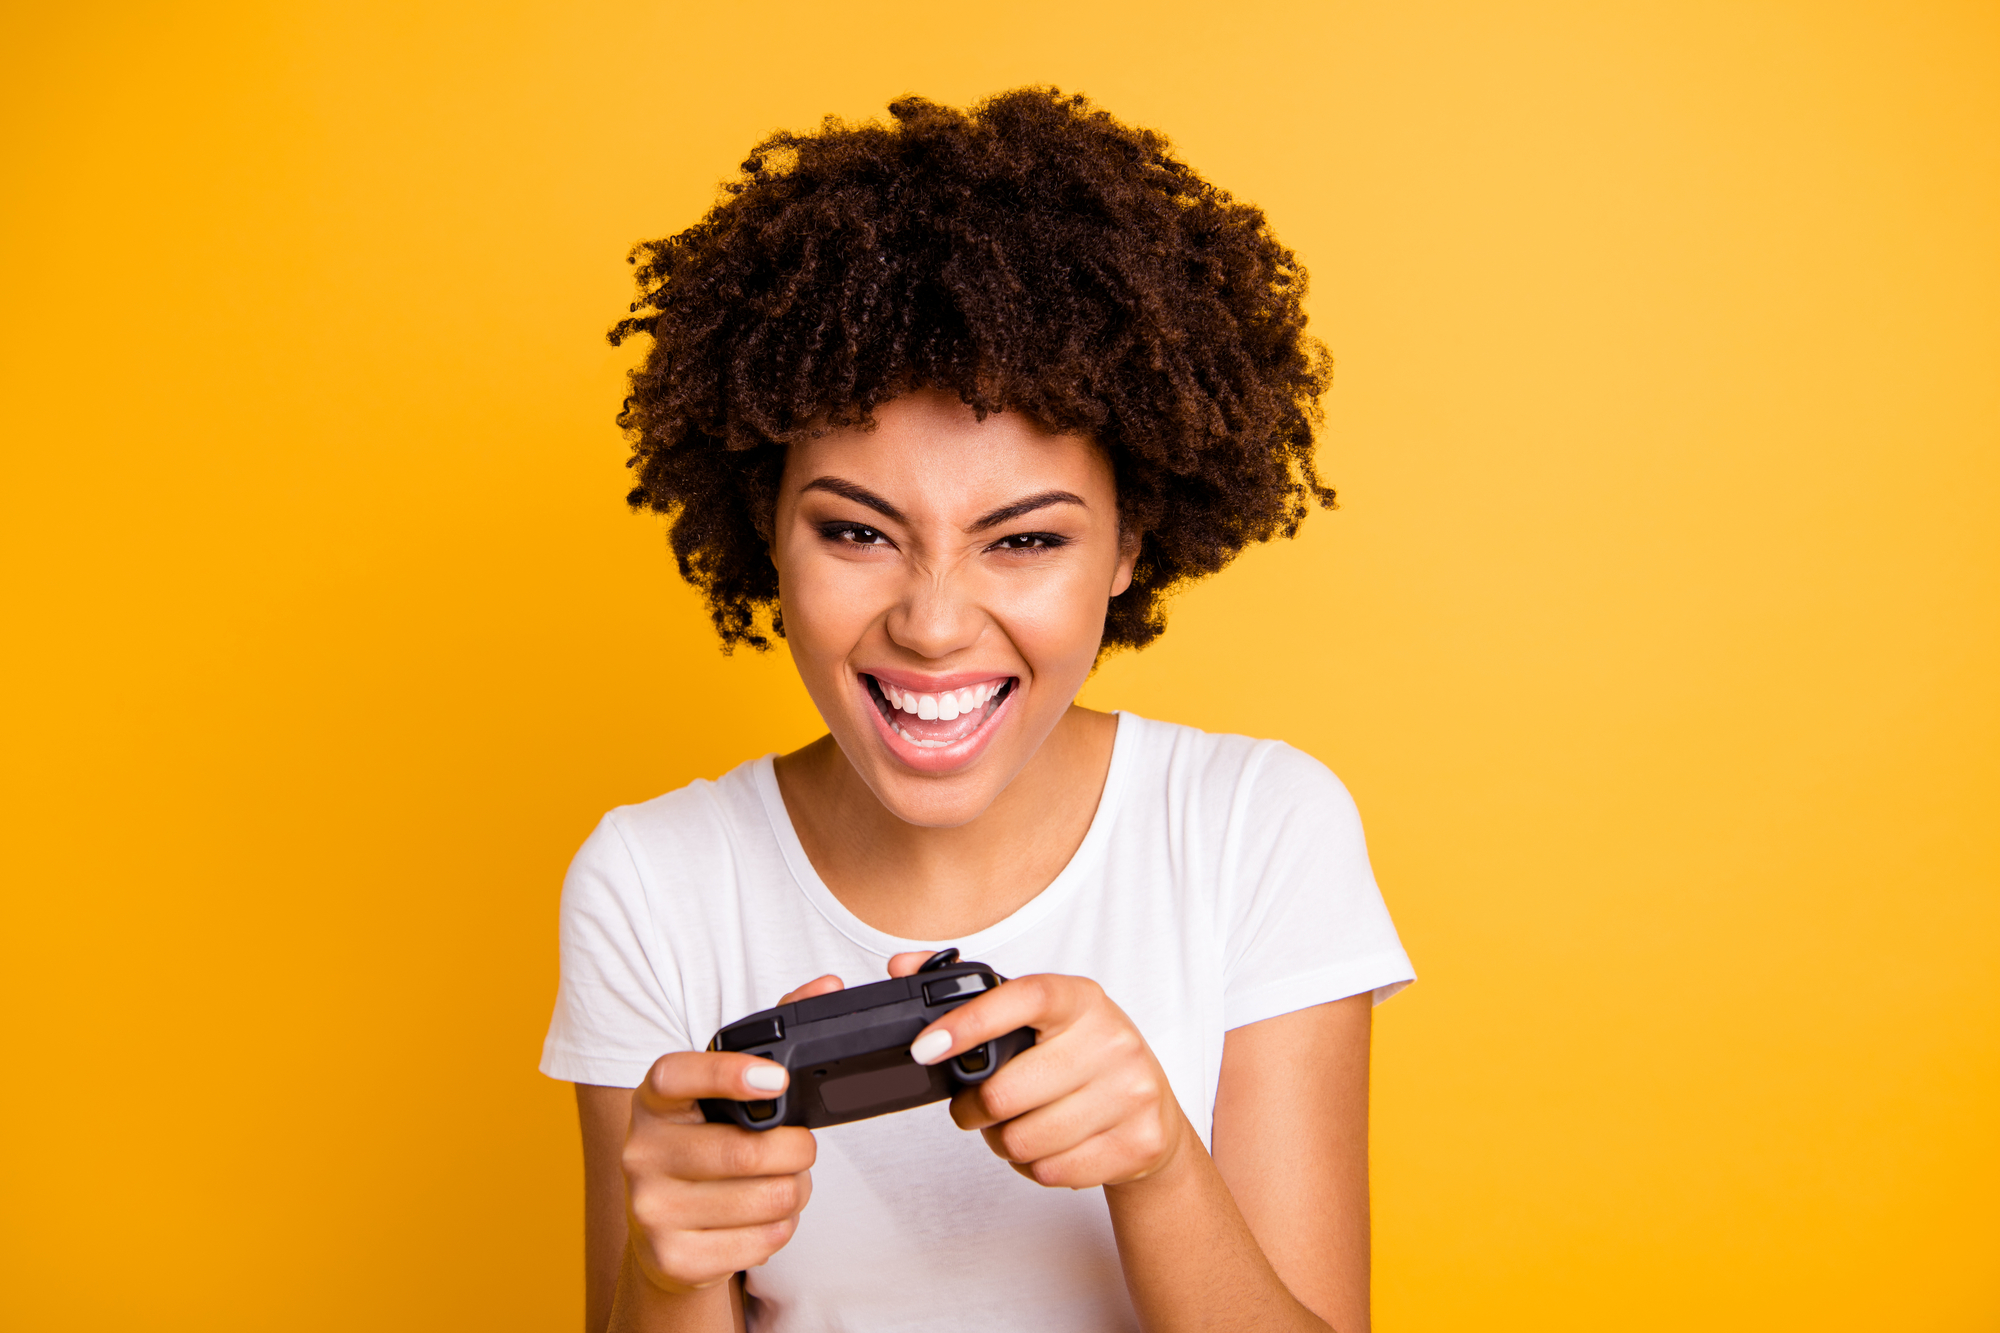 A young woman enjoying a paid video game session over a yellow background.